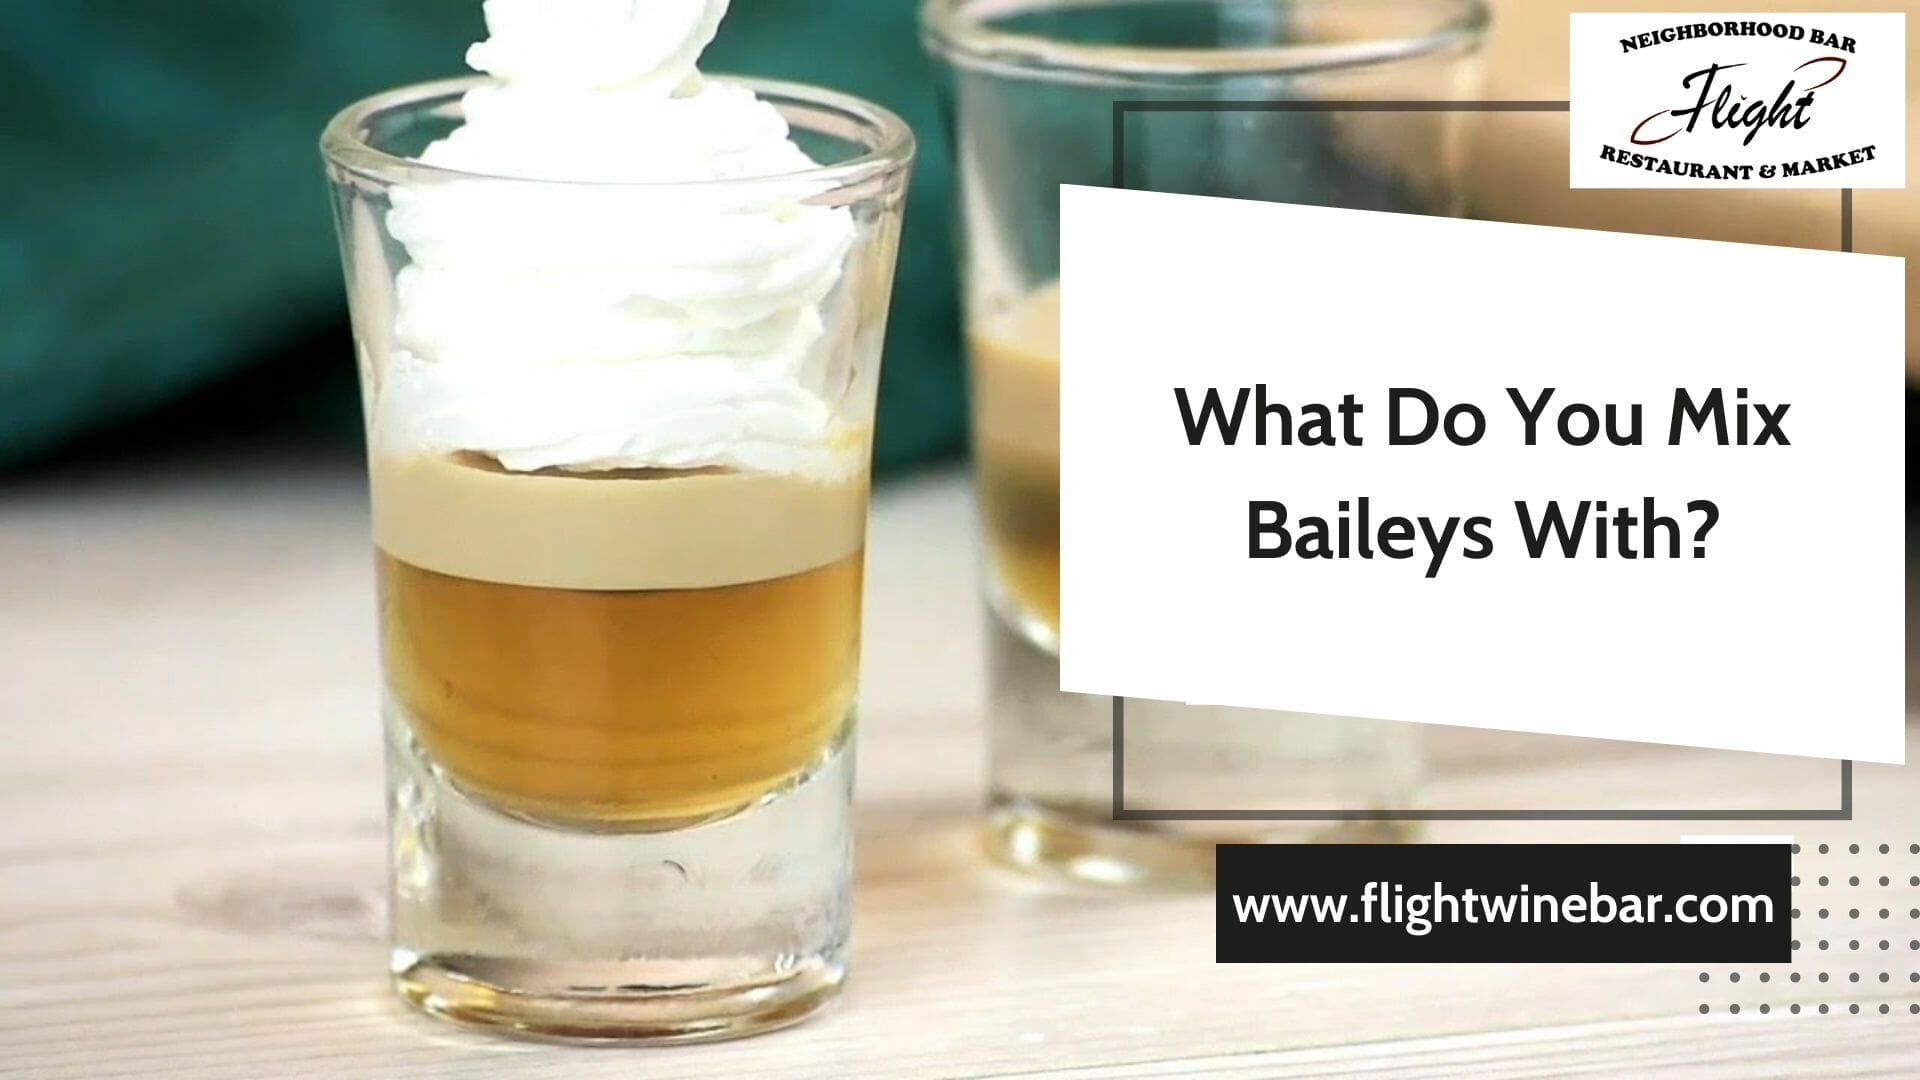 What Do You Mix Baileys With